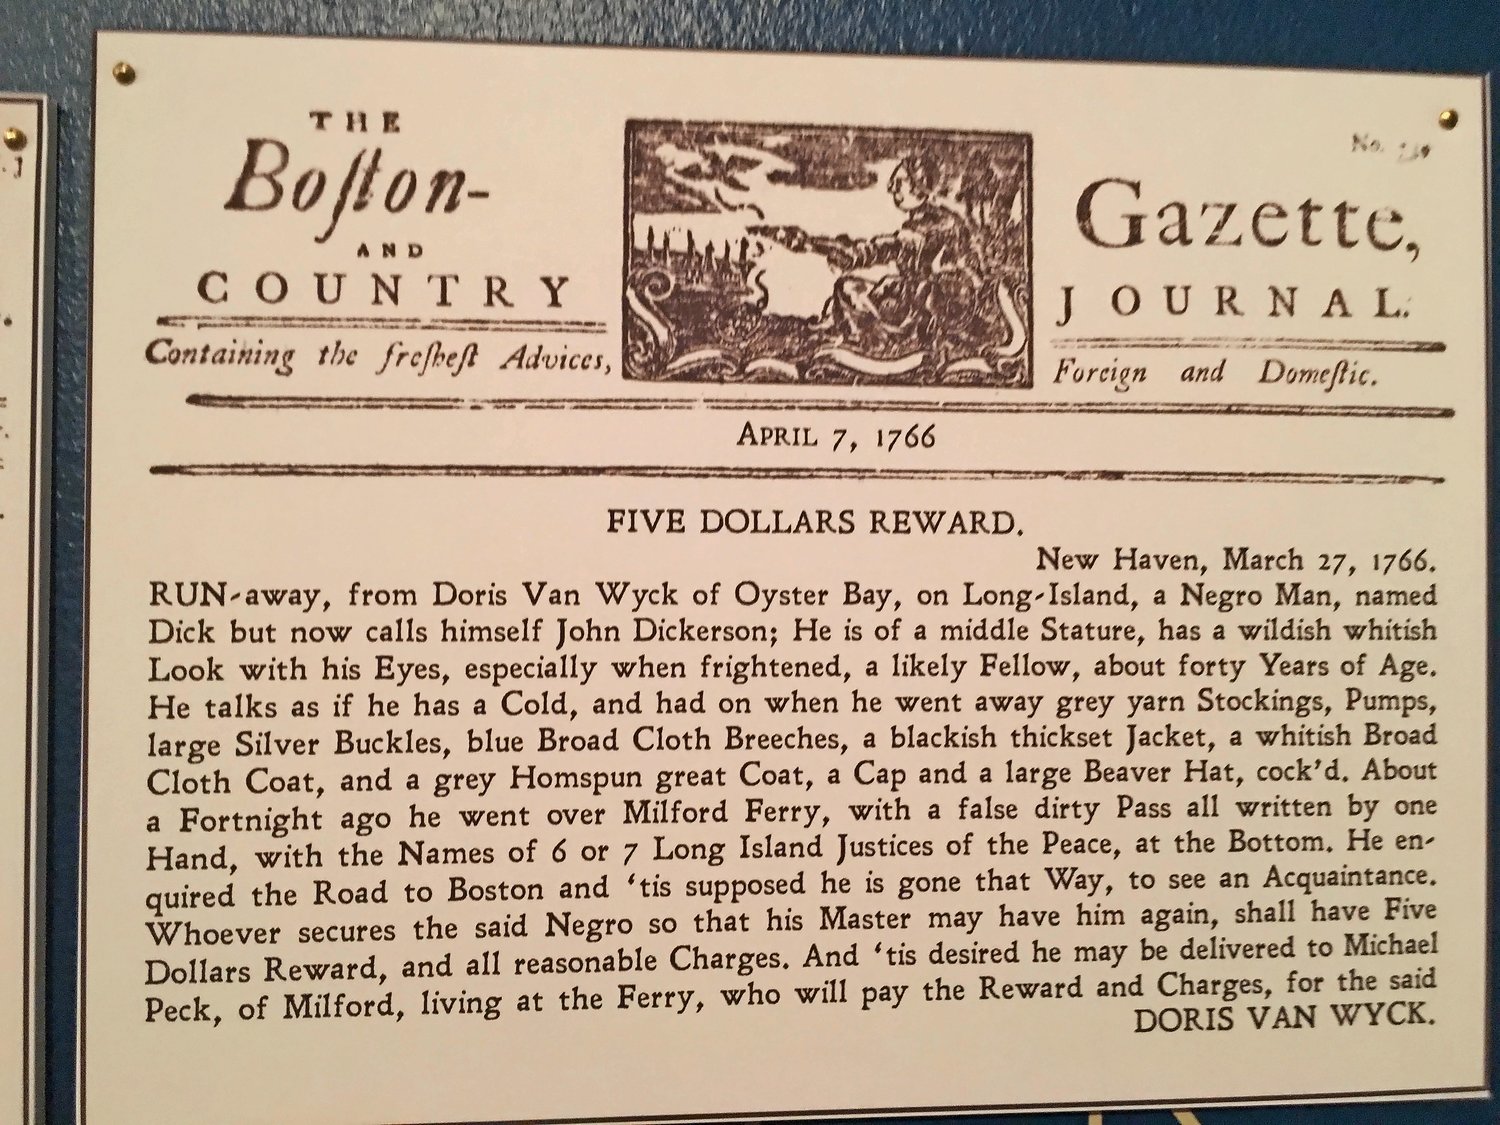 An advertisement about a runaway slave from Oyster Bay that offered a $5 reward for his return.